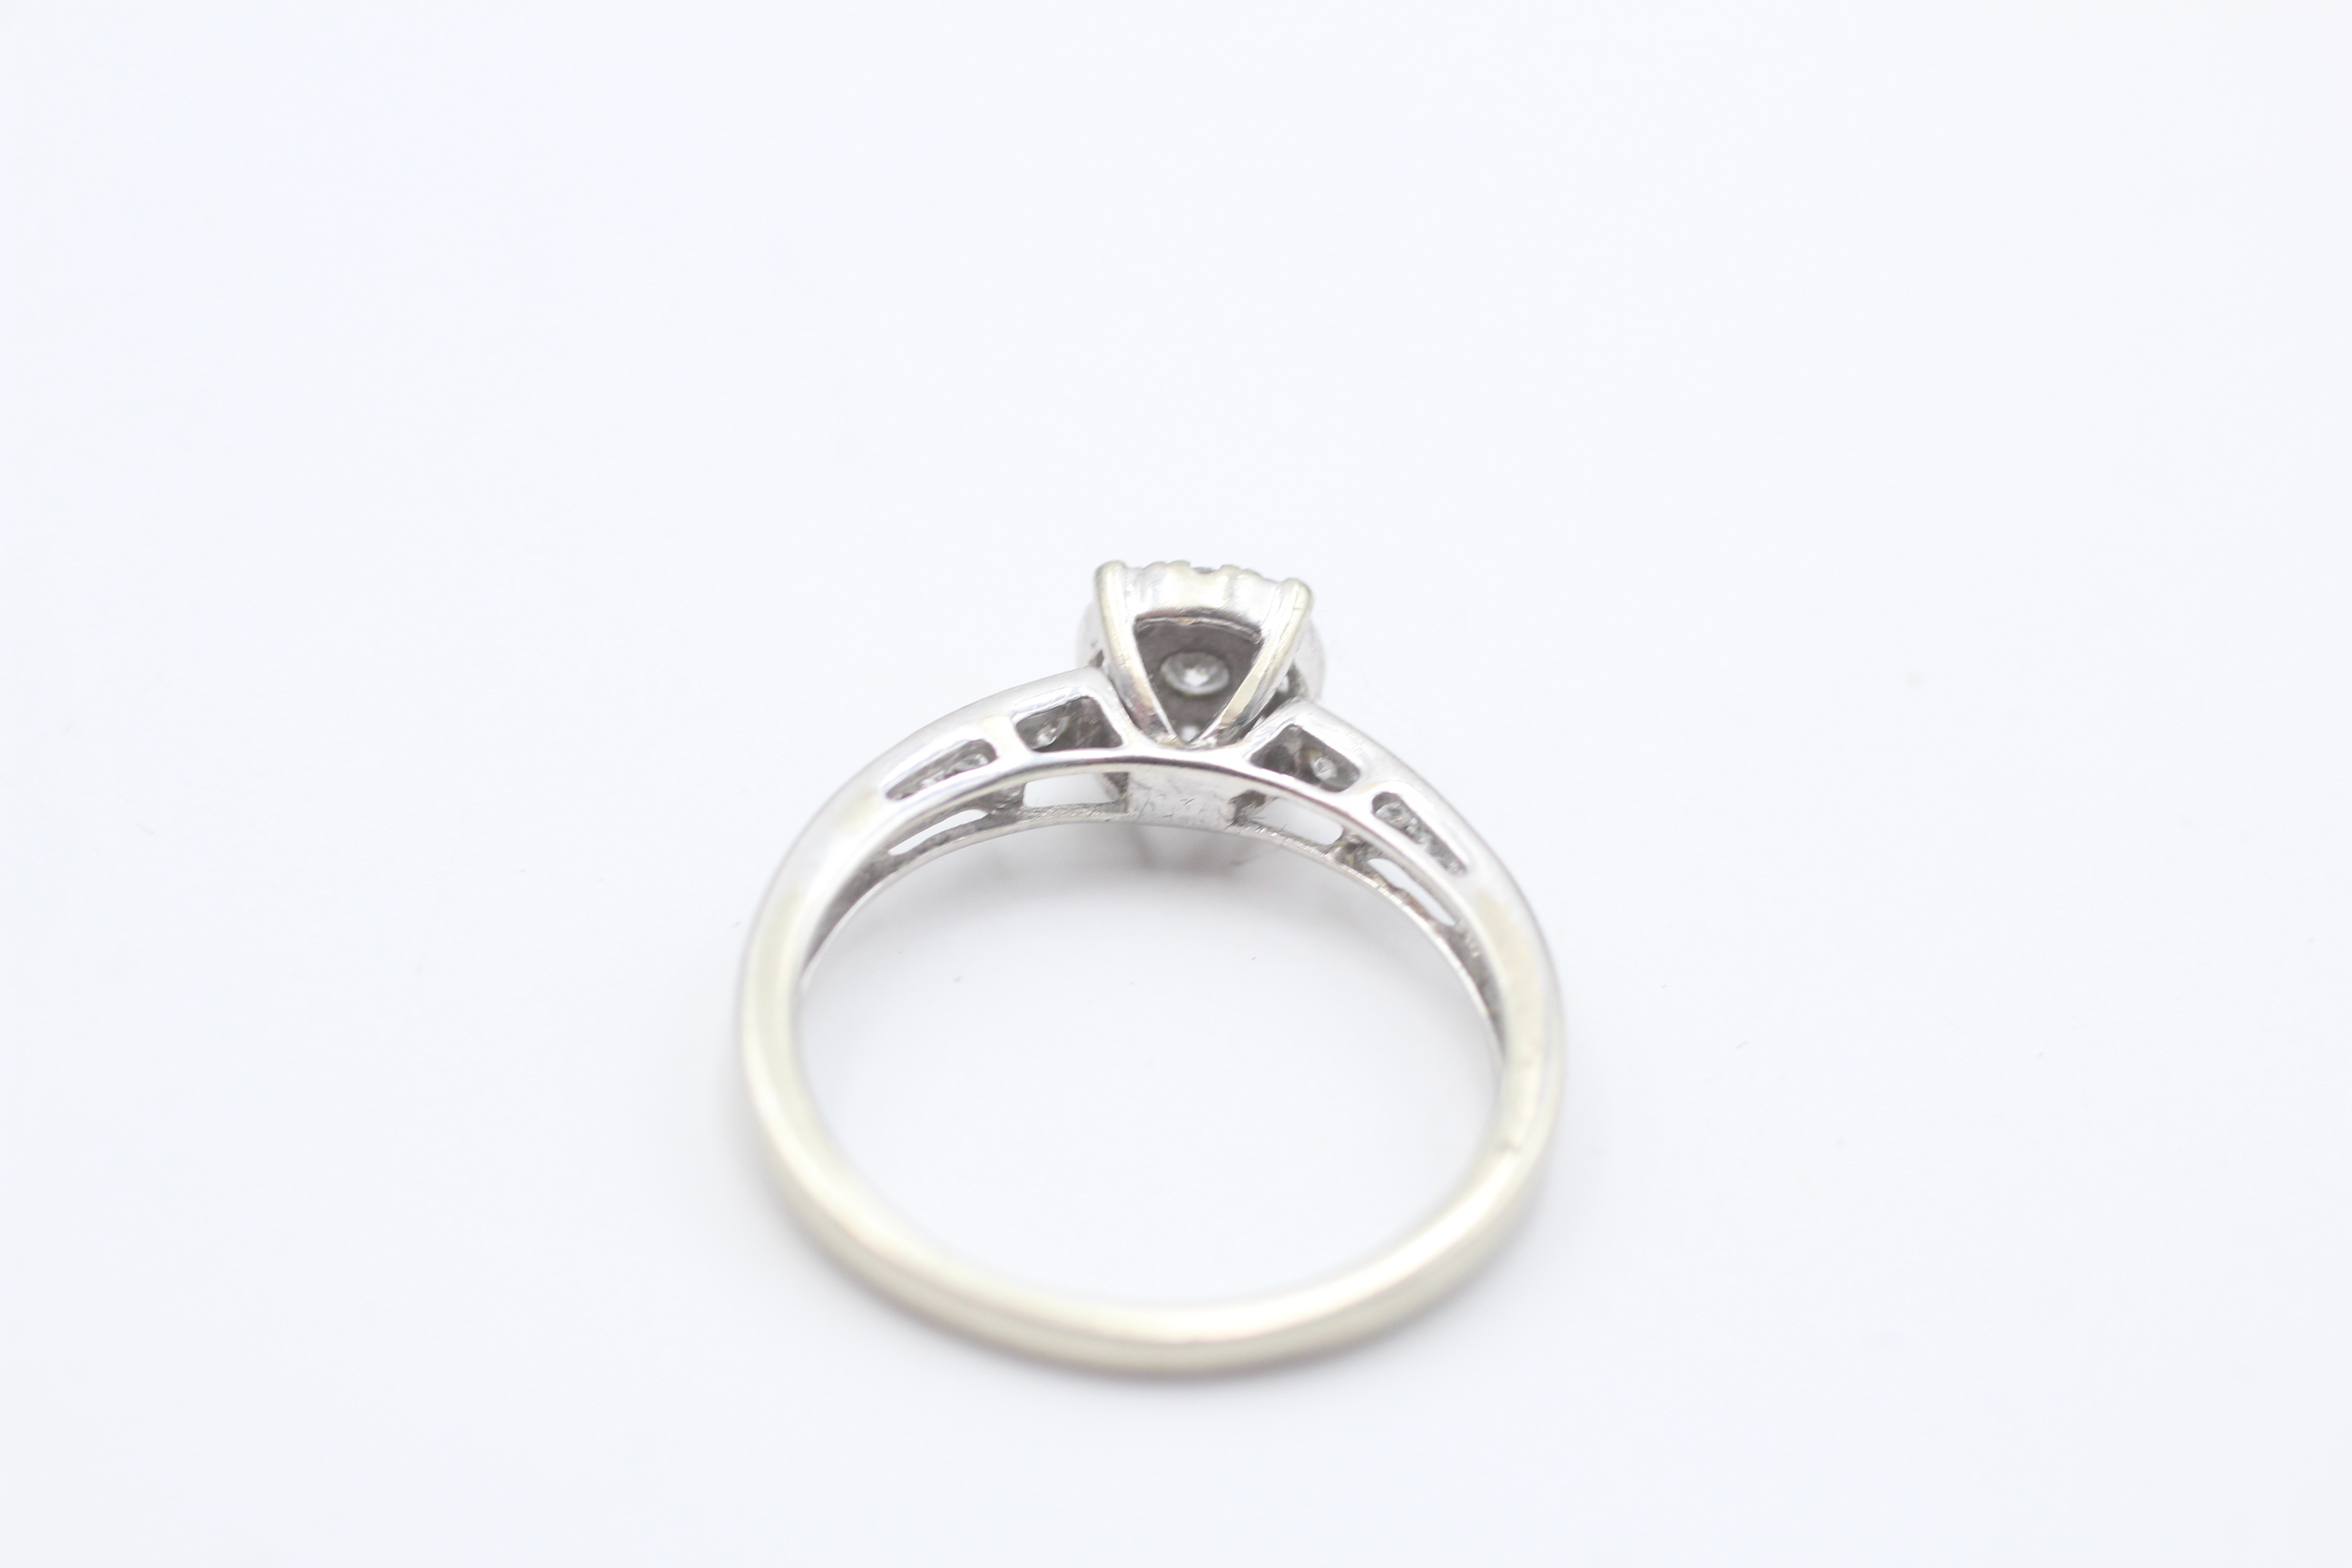 9ct white gold diamond halo & channel set shoulders ring (1.9g) - Image 4 of 4